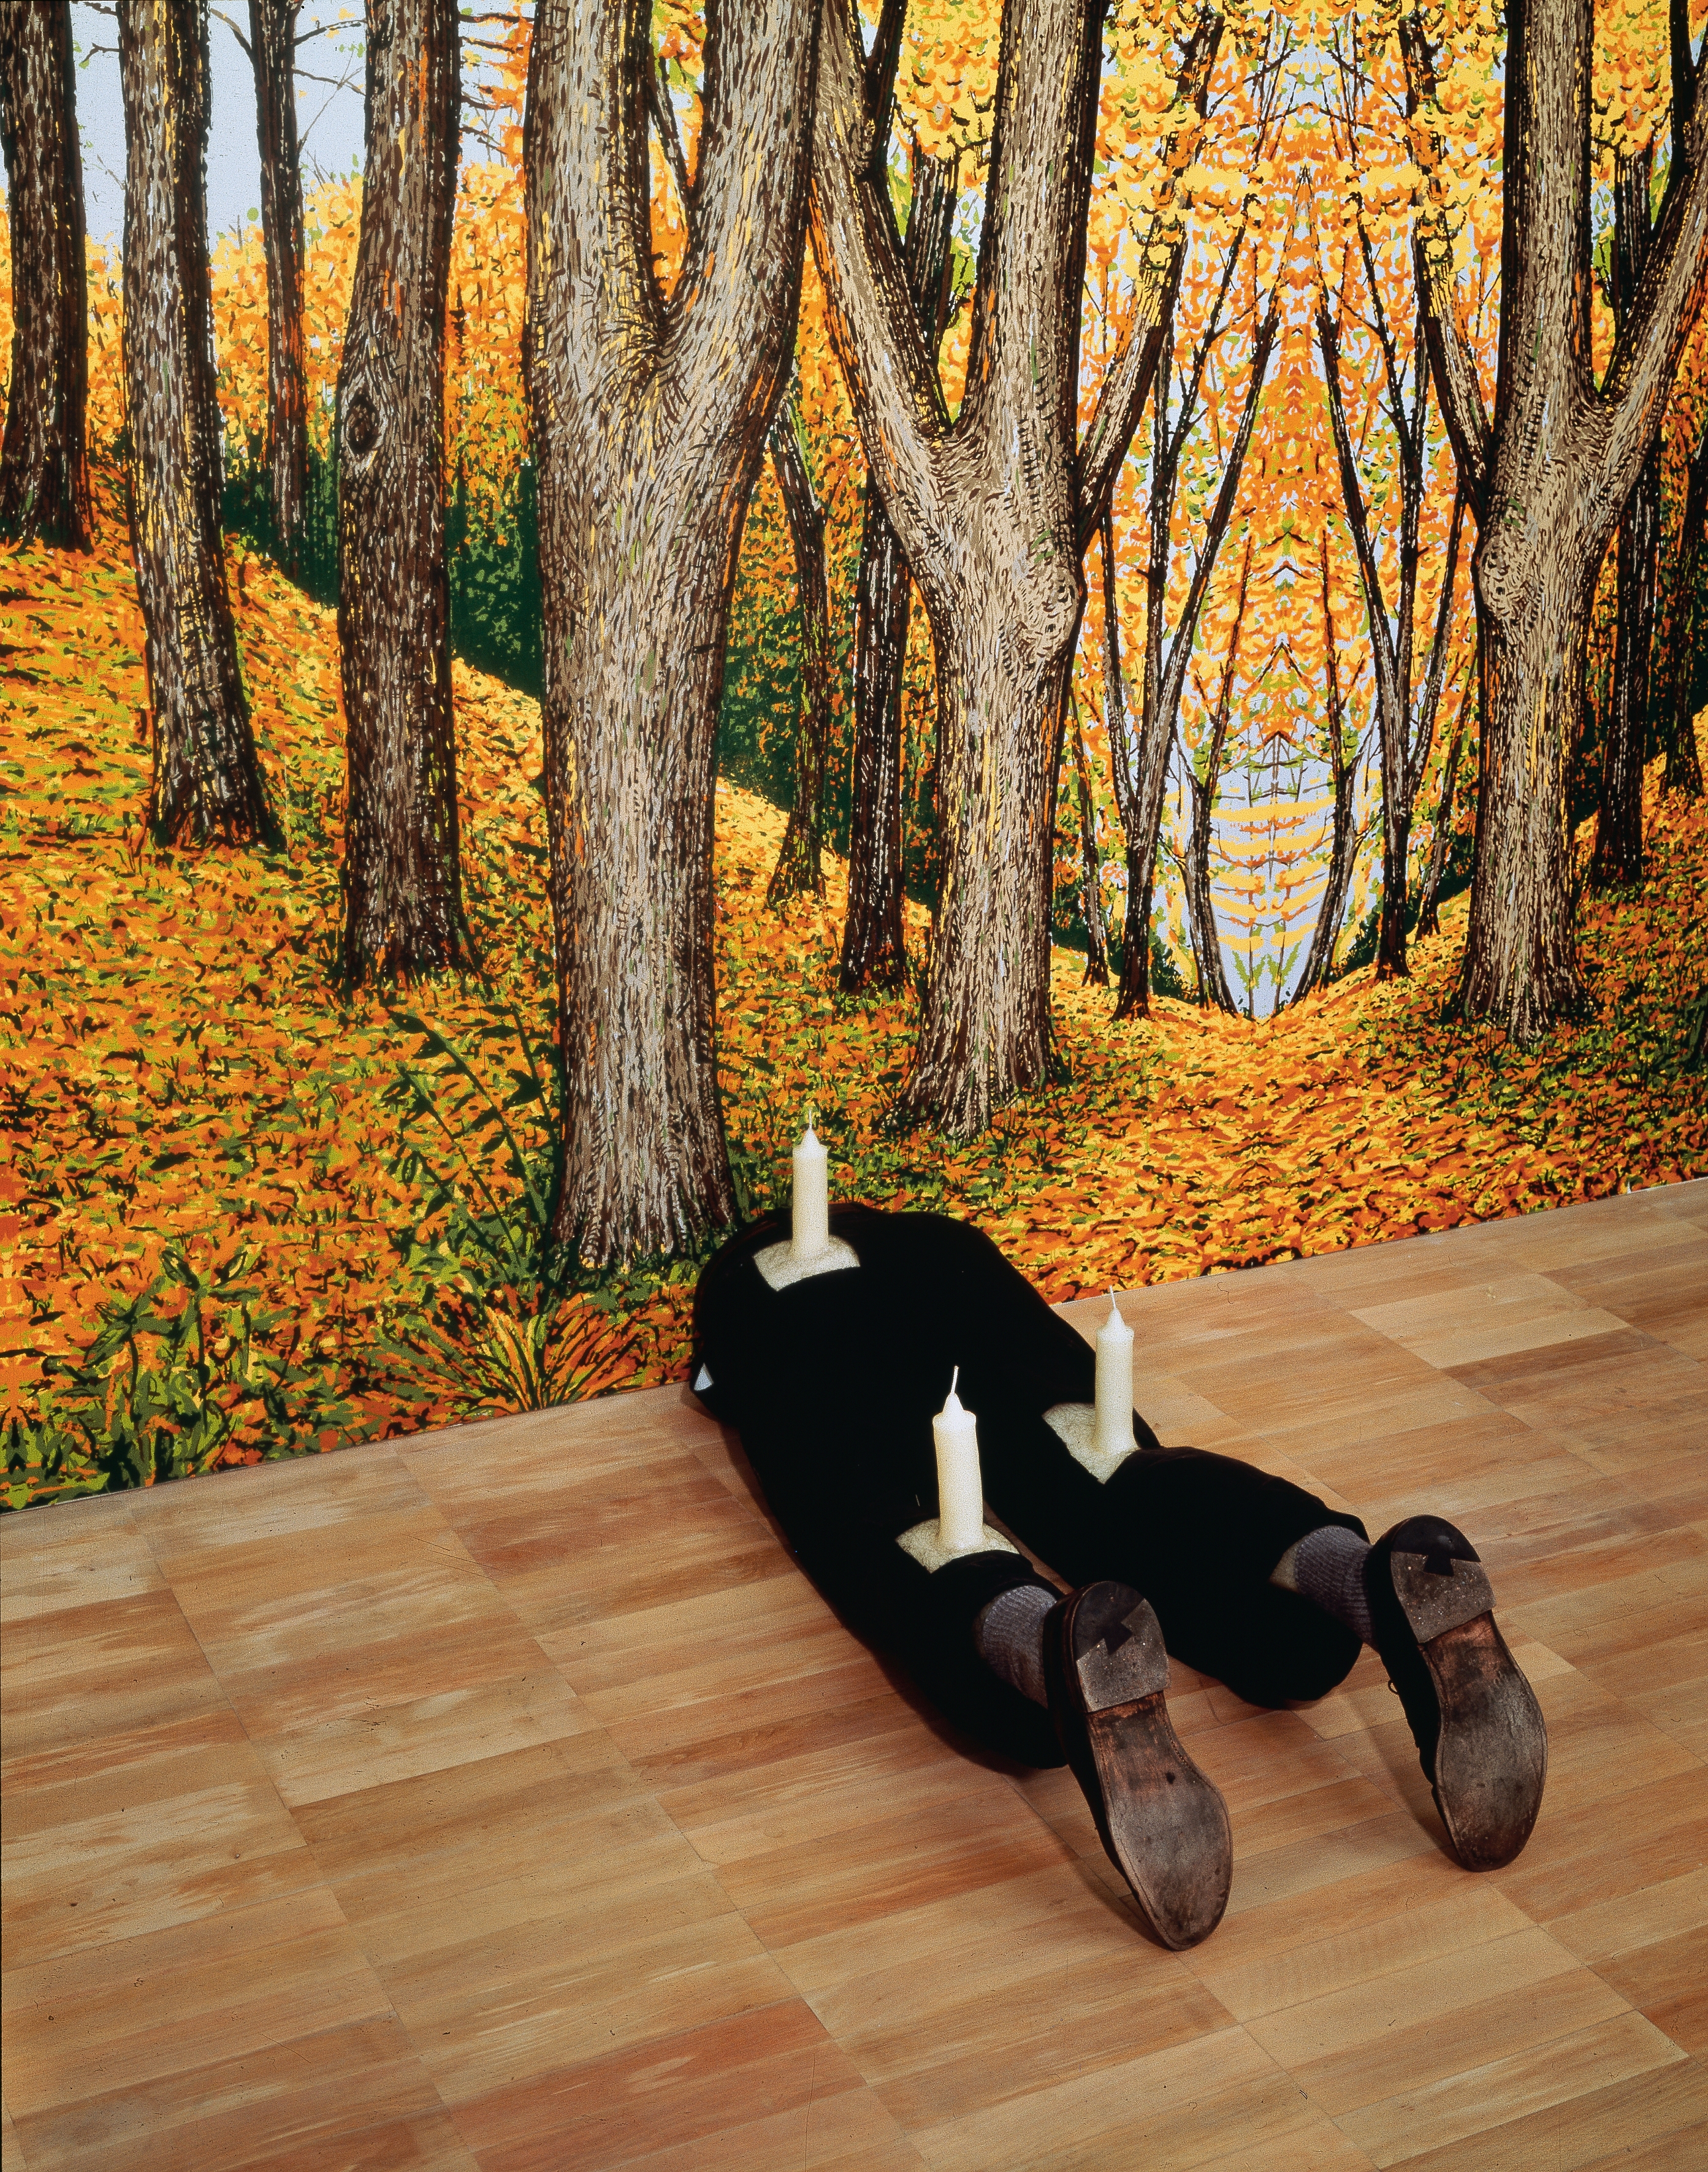 Robert Gober (American, born 1954) Untitled. 1991 Wood, beeswax, leather, fabric, and human hair. 13 1/4 x 16 1/2 x 46 1/8″ (33.6 x 41.9 x 117.2 cm)  The Museum of Modern Art, New York. Gift of Werner and Elaine Dannheisser Background: Forest, 1991 Hand-painted silkscreen on paper Image Credit: K. Ignatiadis, courtesy the artist and Matthew Marks Gallery © 2014 Robert Gober